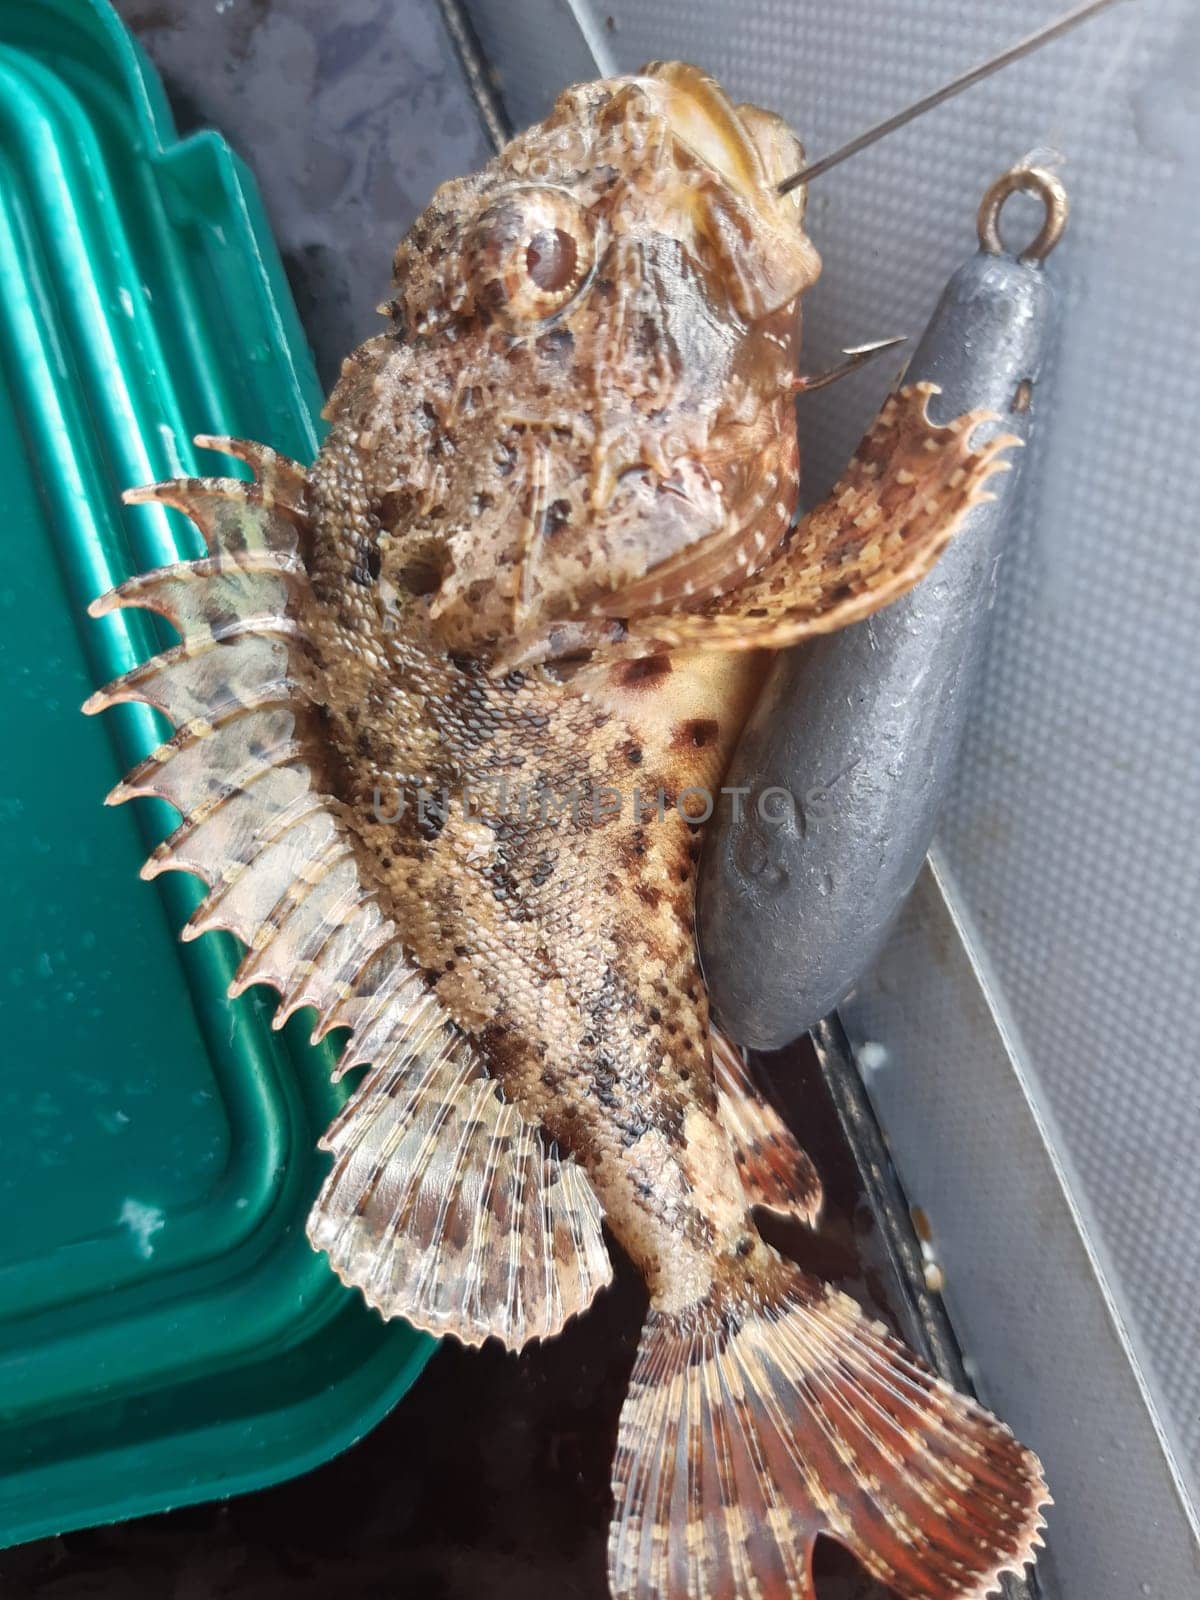 Black Sea scorpionfish, or Black Sea sea ruff.The maximum body length is 40 cm, usually about 15 cm. When inserted, swelling begins.